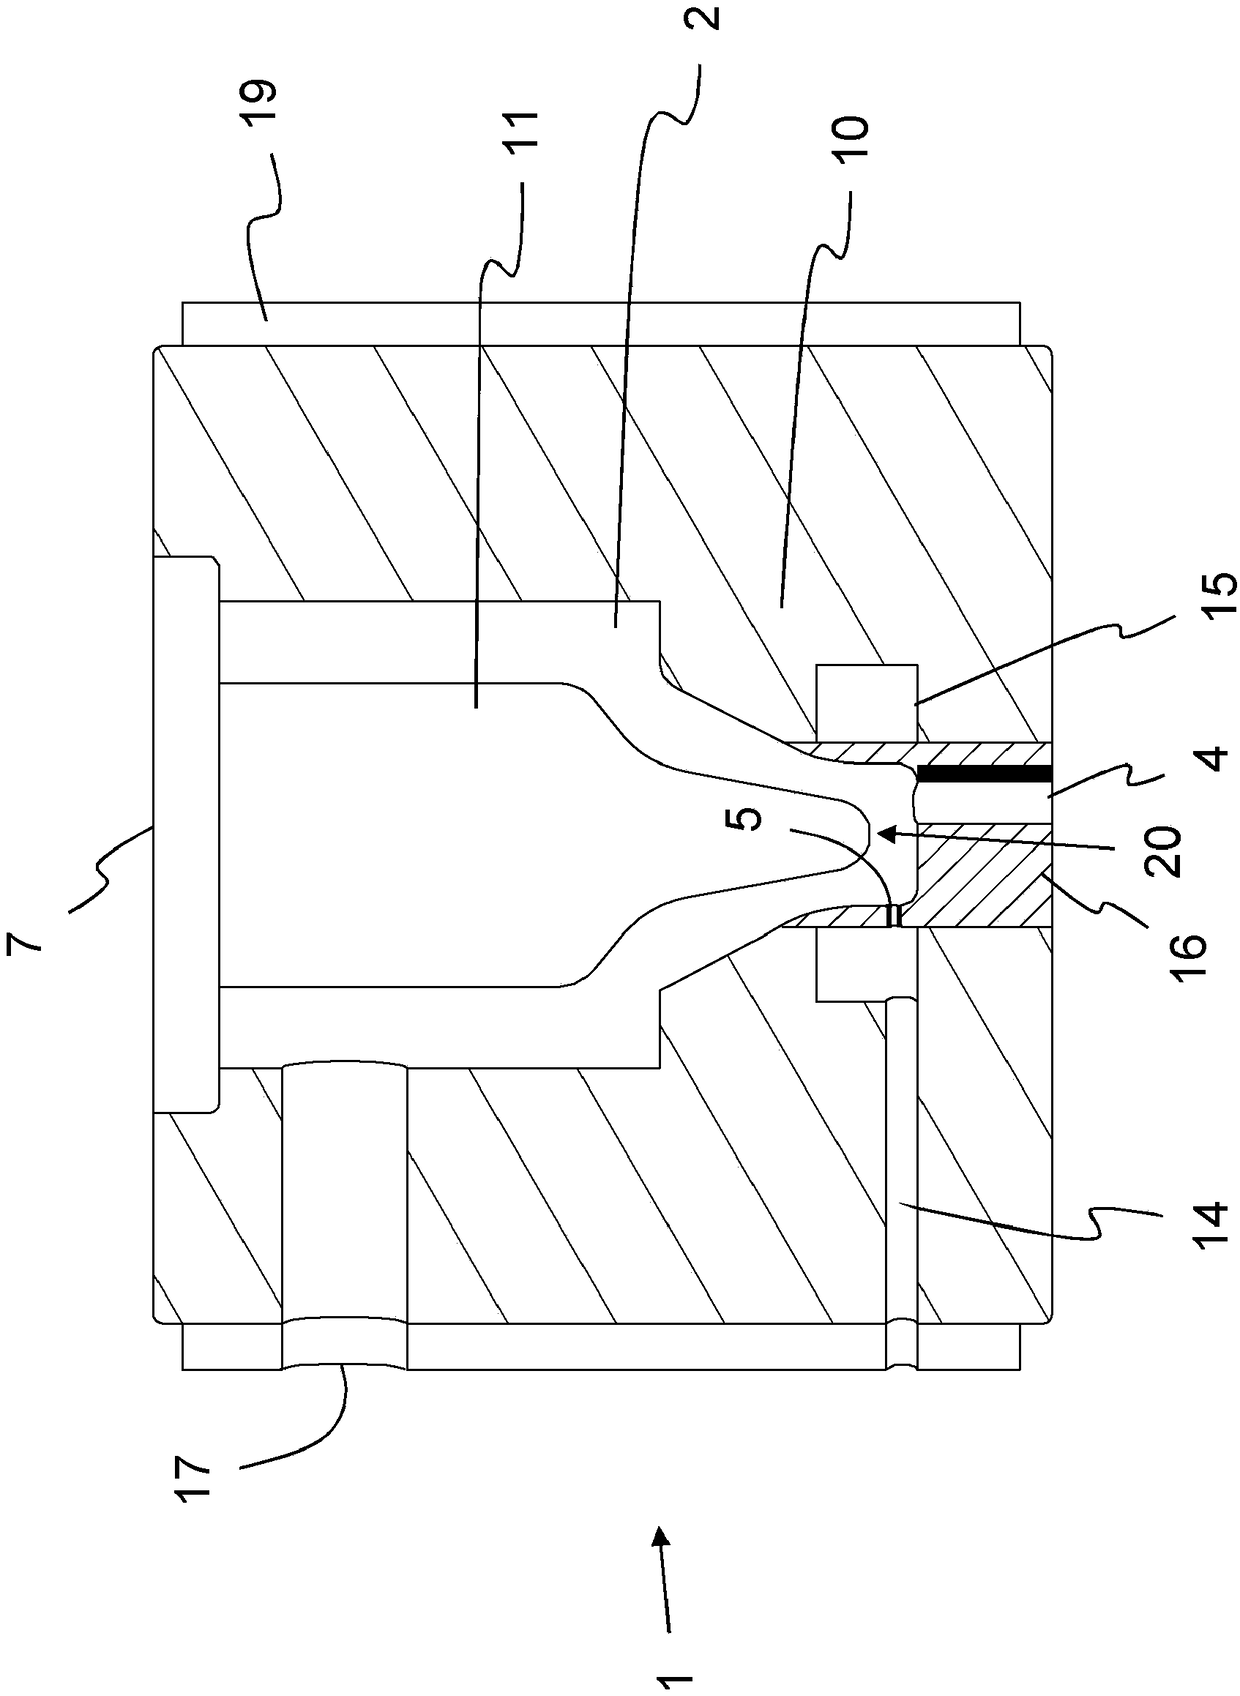 Method for operating air-jet spinning machine with cooling arrangement.